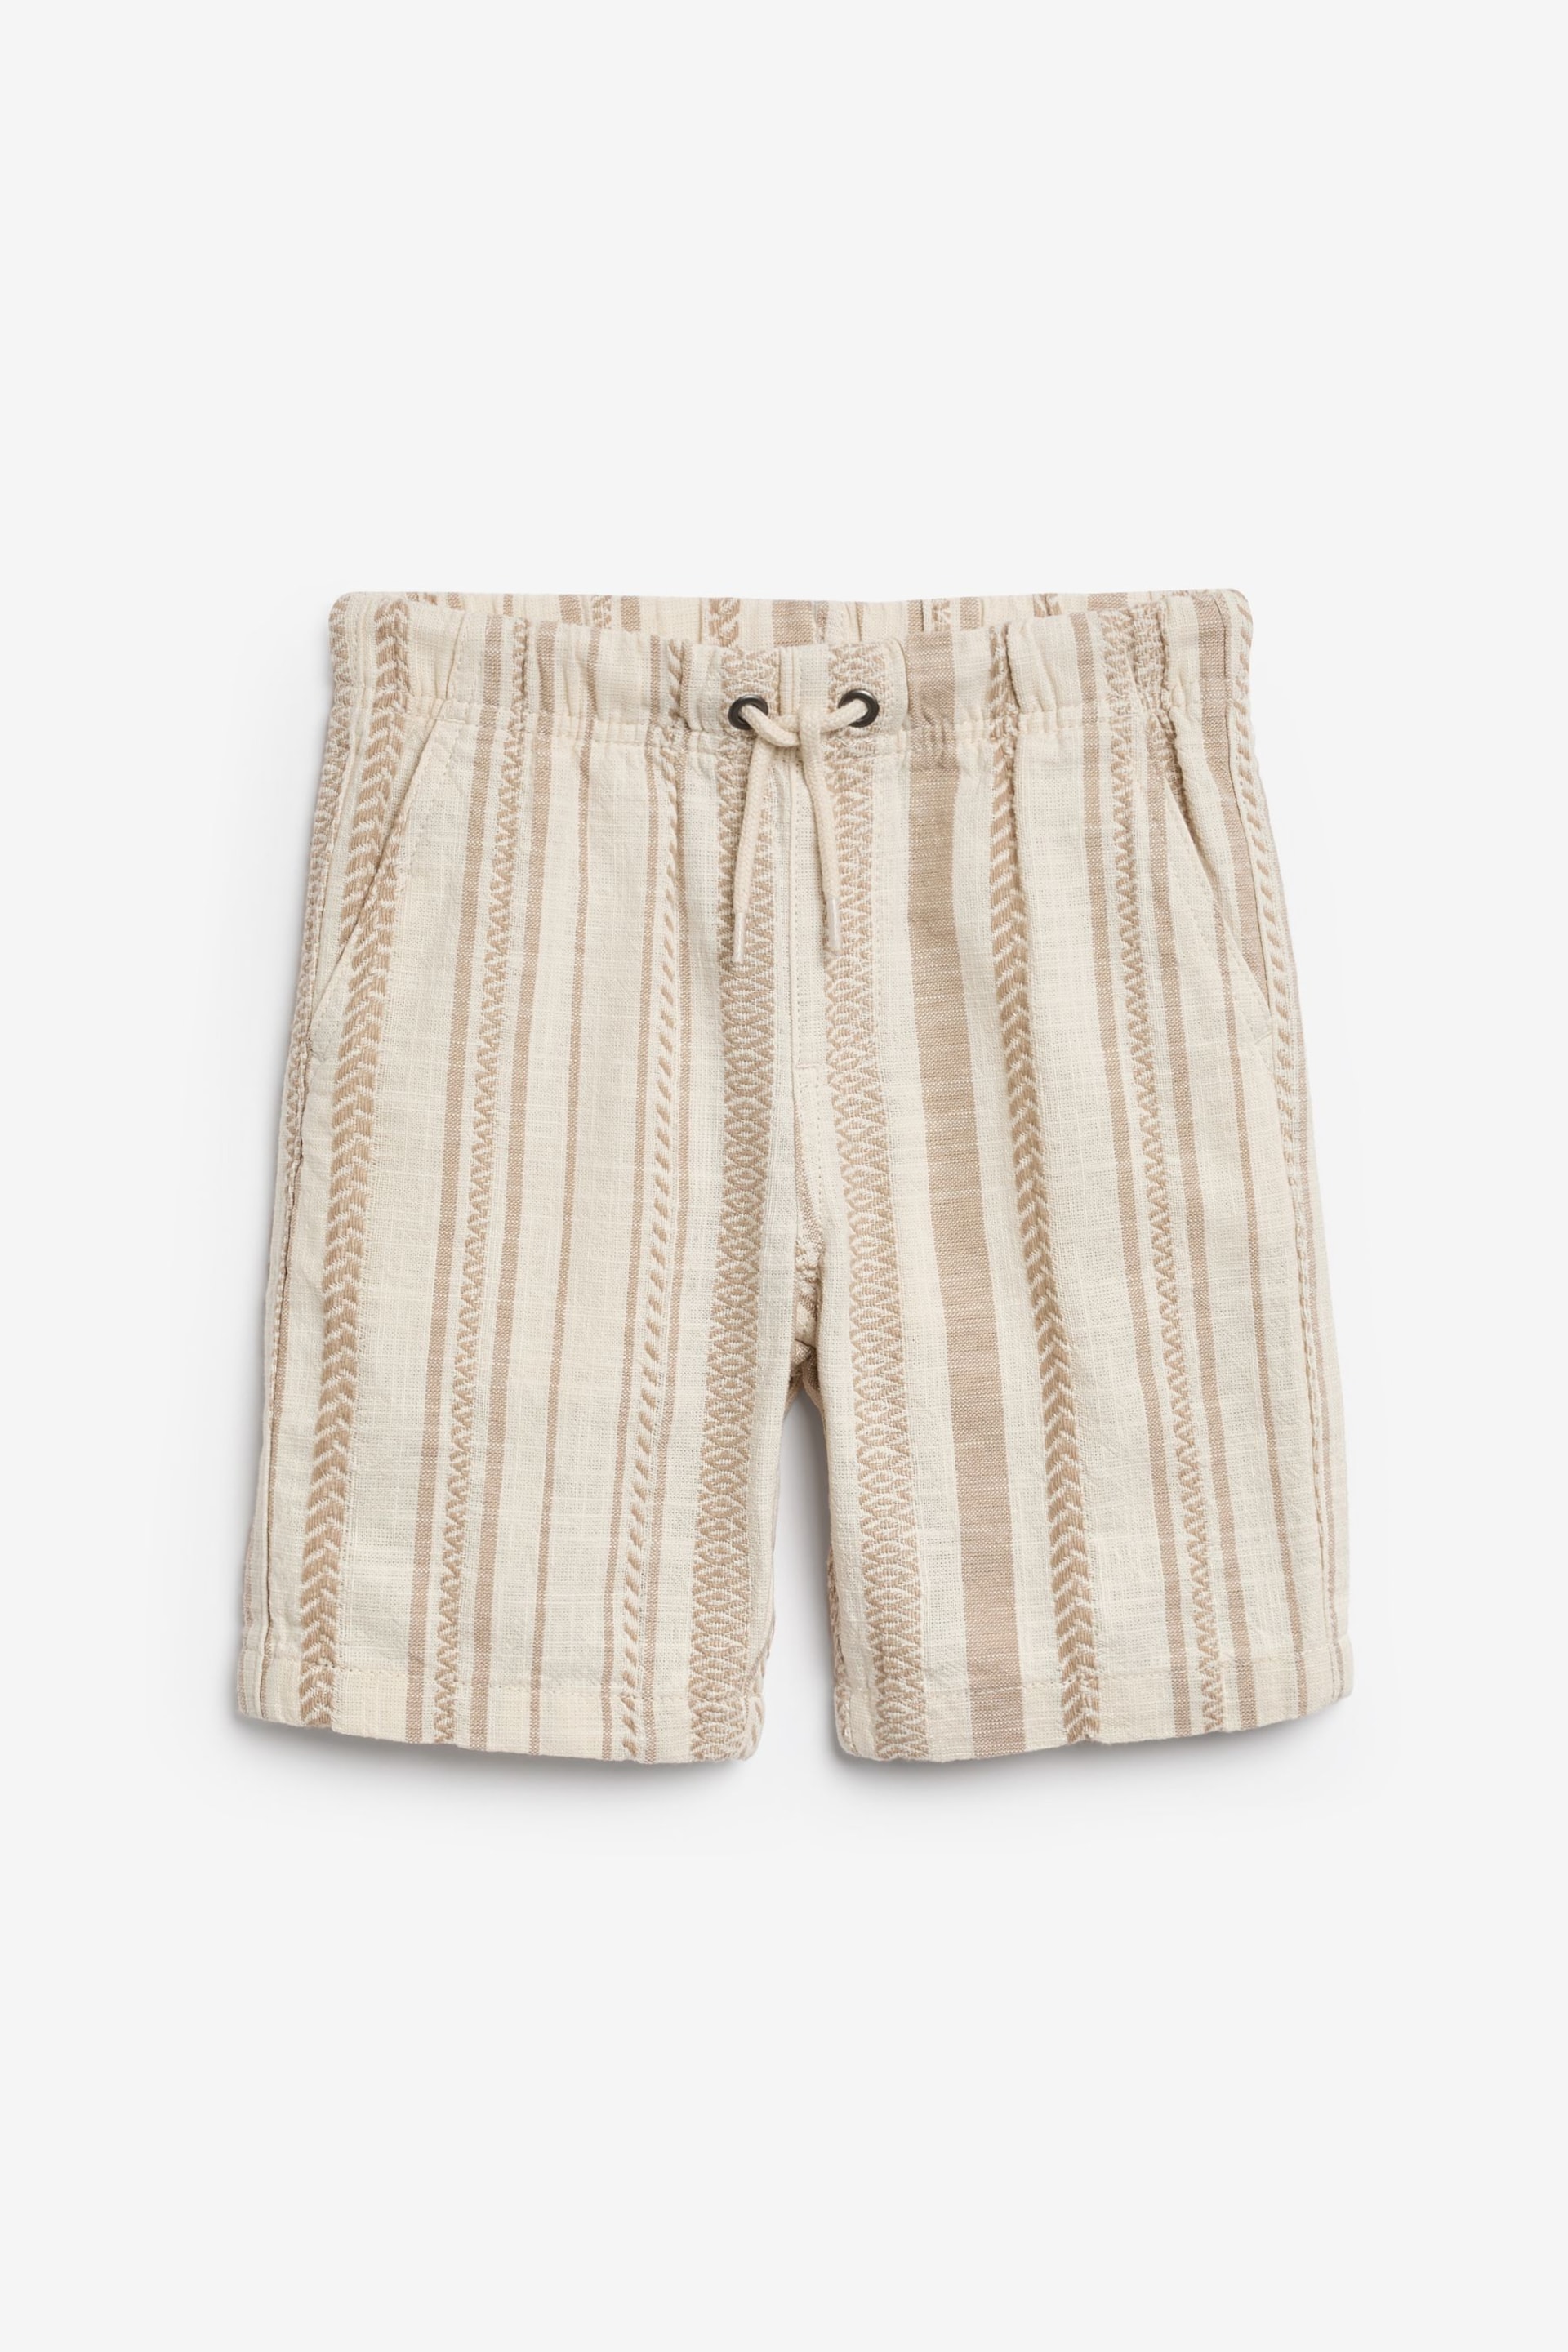 Neutral Textured Stripe Shorts (3-16yrs) - Image 1 of 3